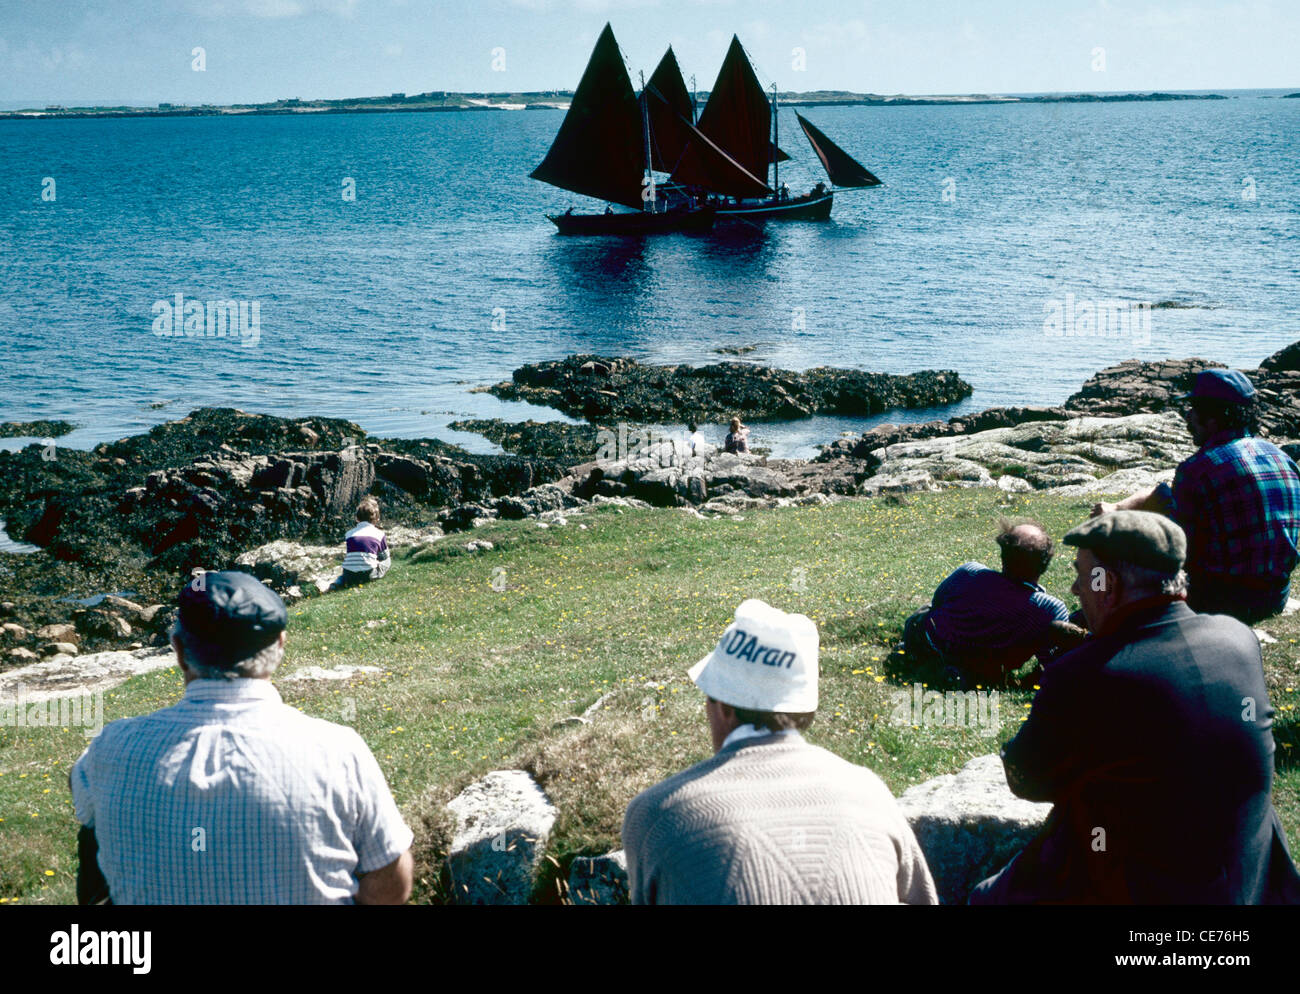 Men on a grassy bank watch a race in progress during the annual regatta  at Carna Connemera Co Galway  Ireland. Stock Photo